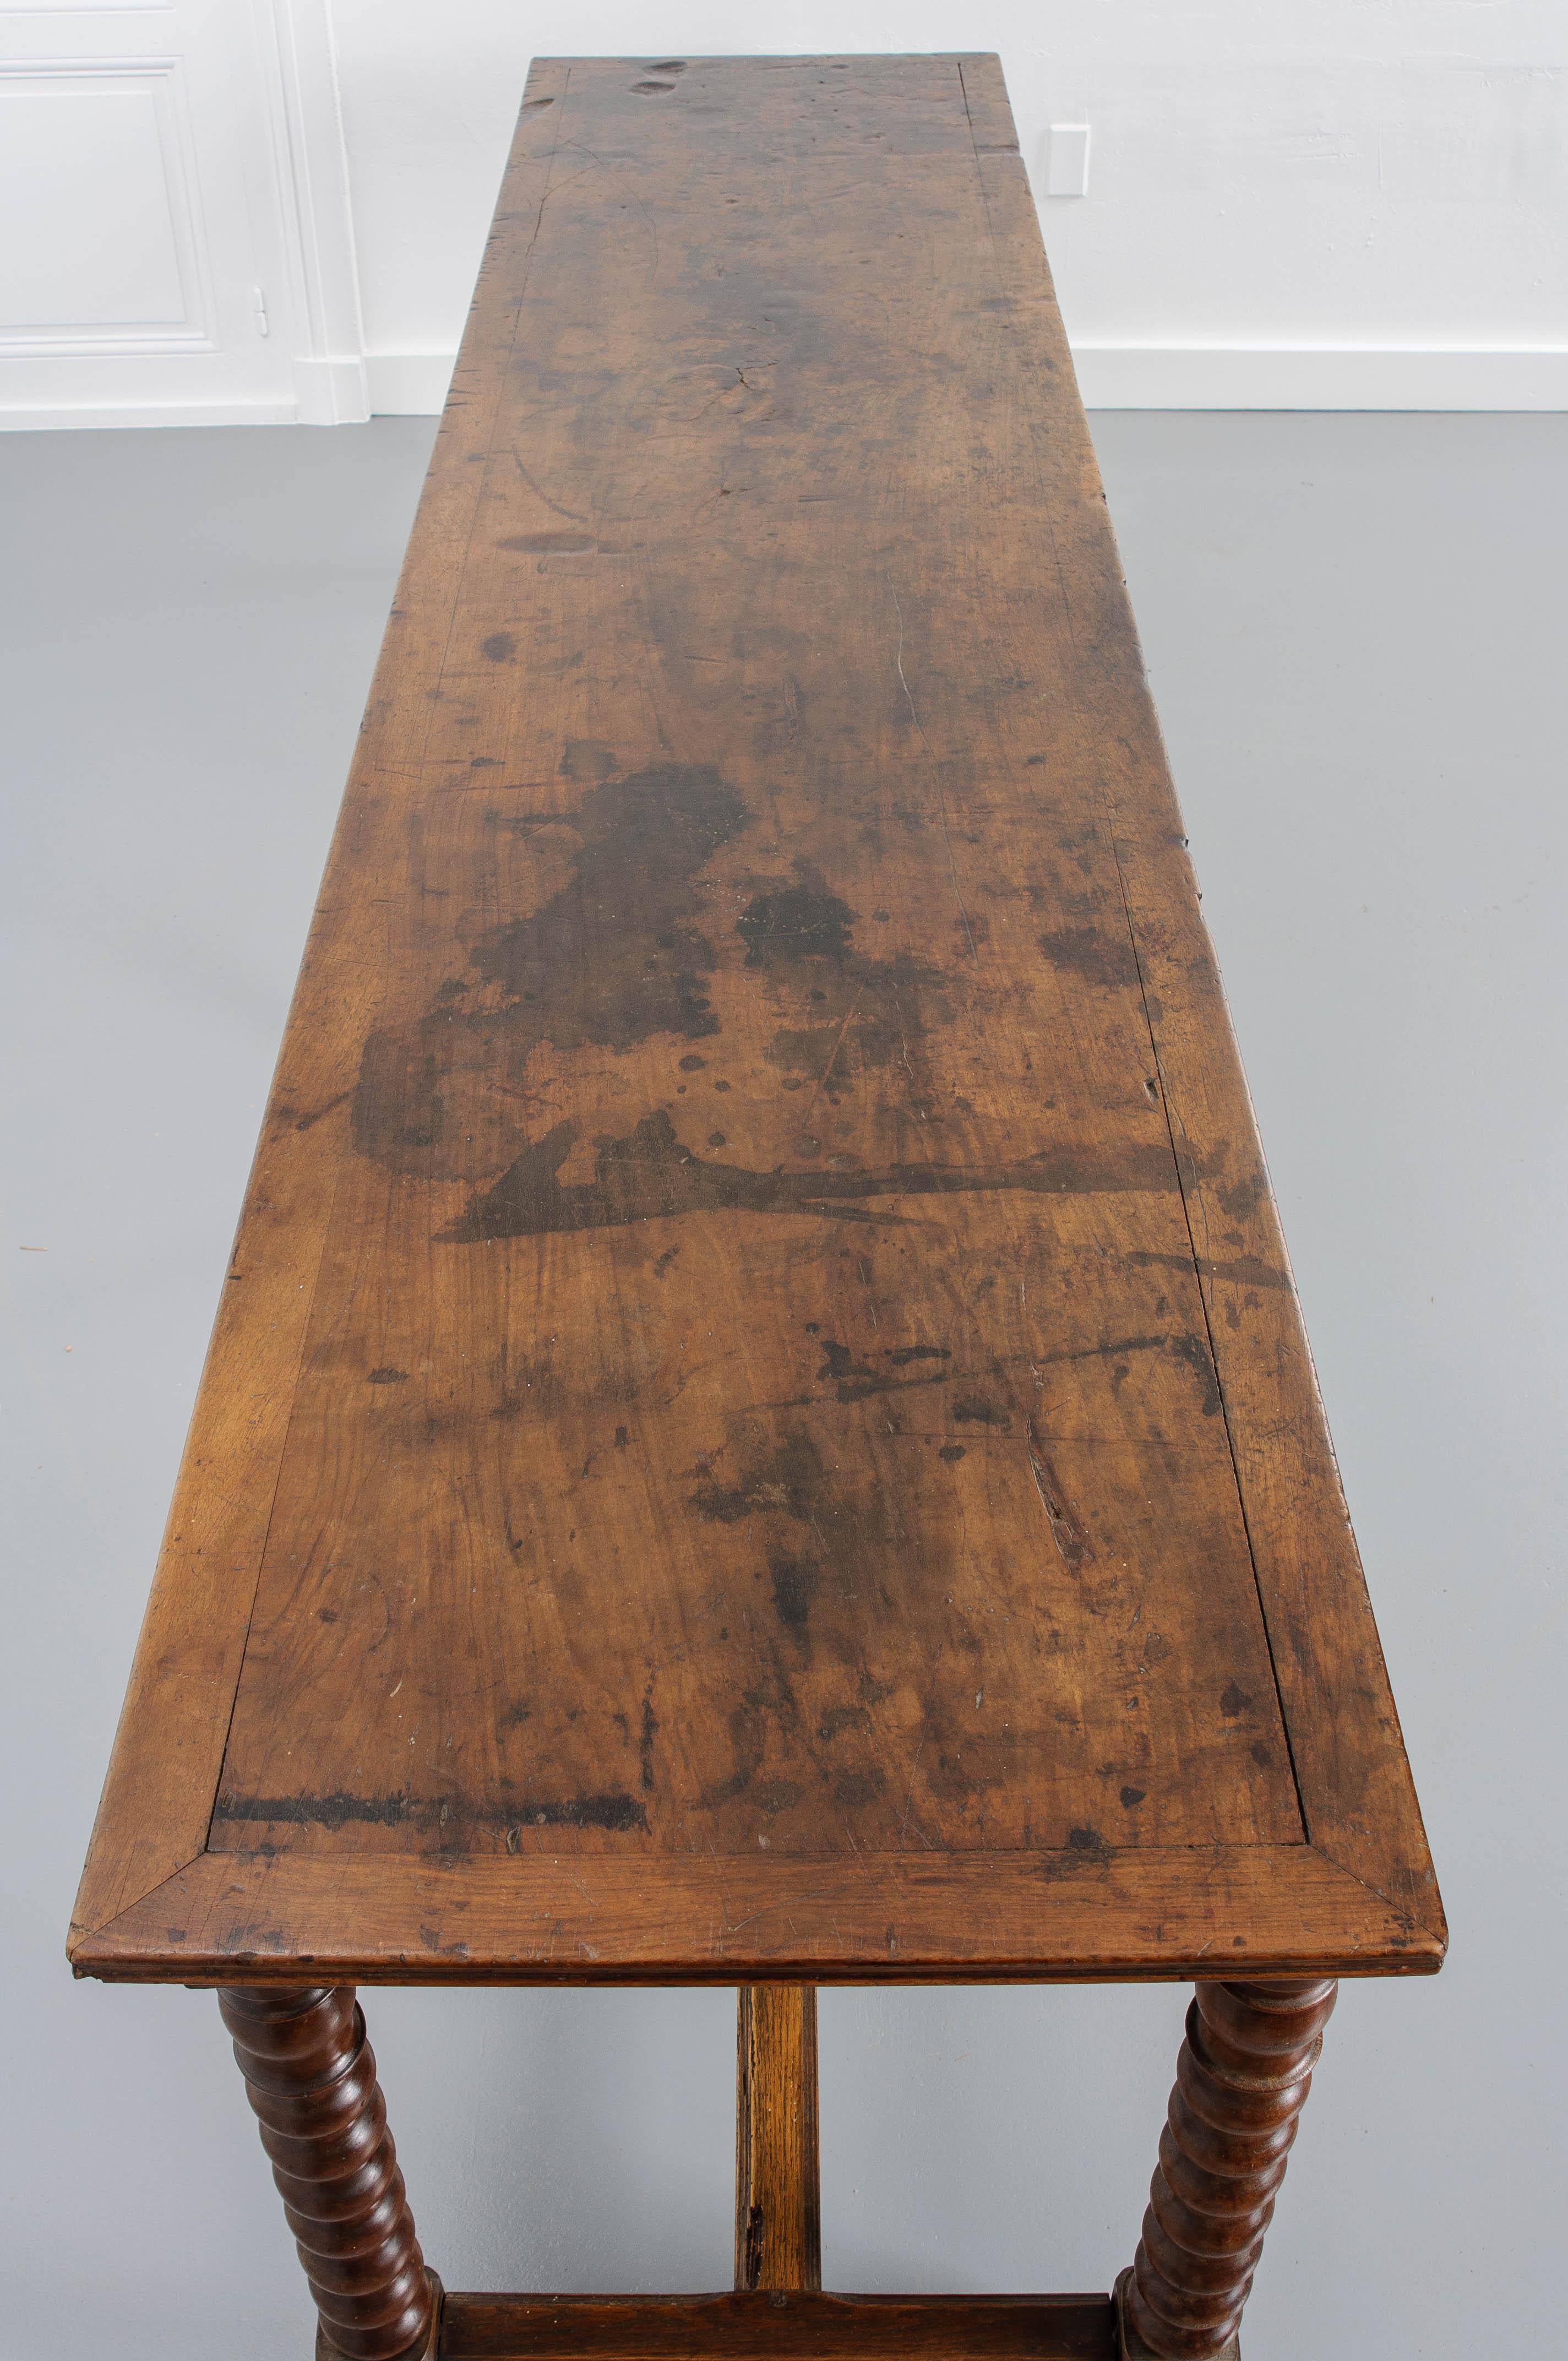 A unique dining table, indeed, this French 19th century walnut and oak farm table was originally purposed as a drapier’s table. Its long, narrow form lends itself to both tailoring window treatments as well as feeding a host of folks in a galley